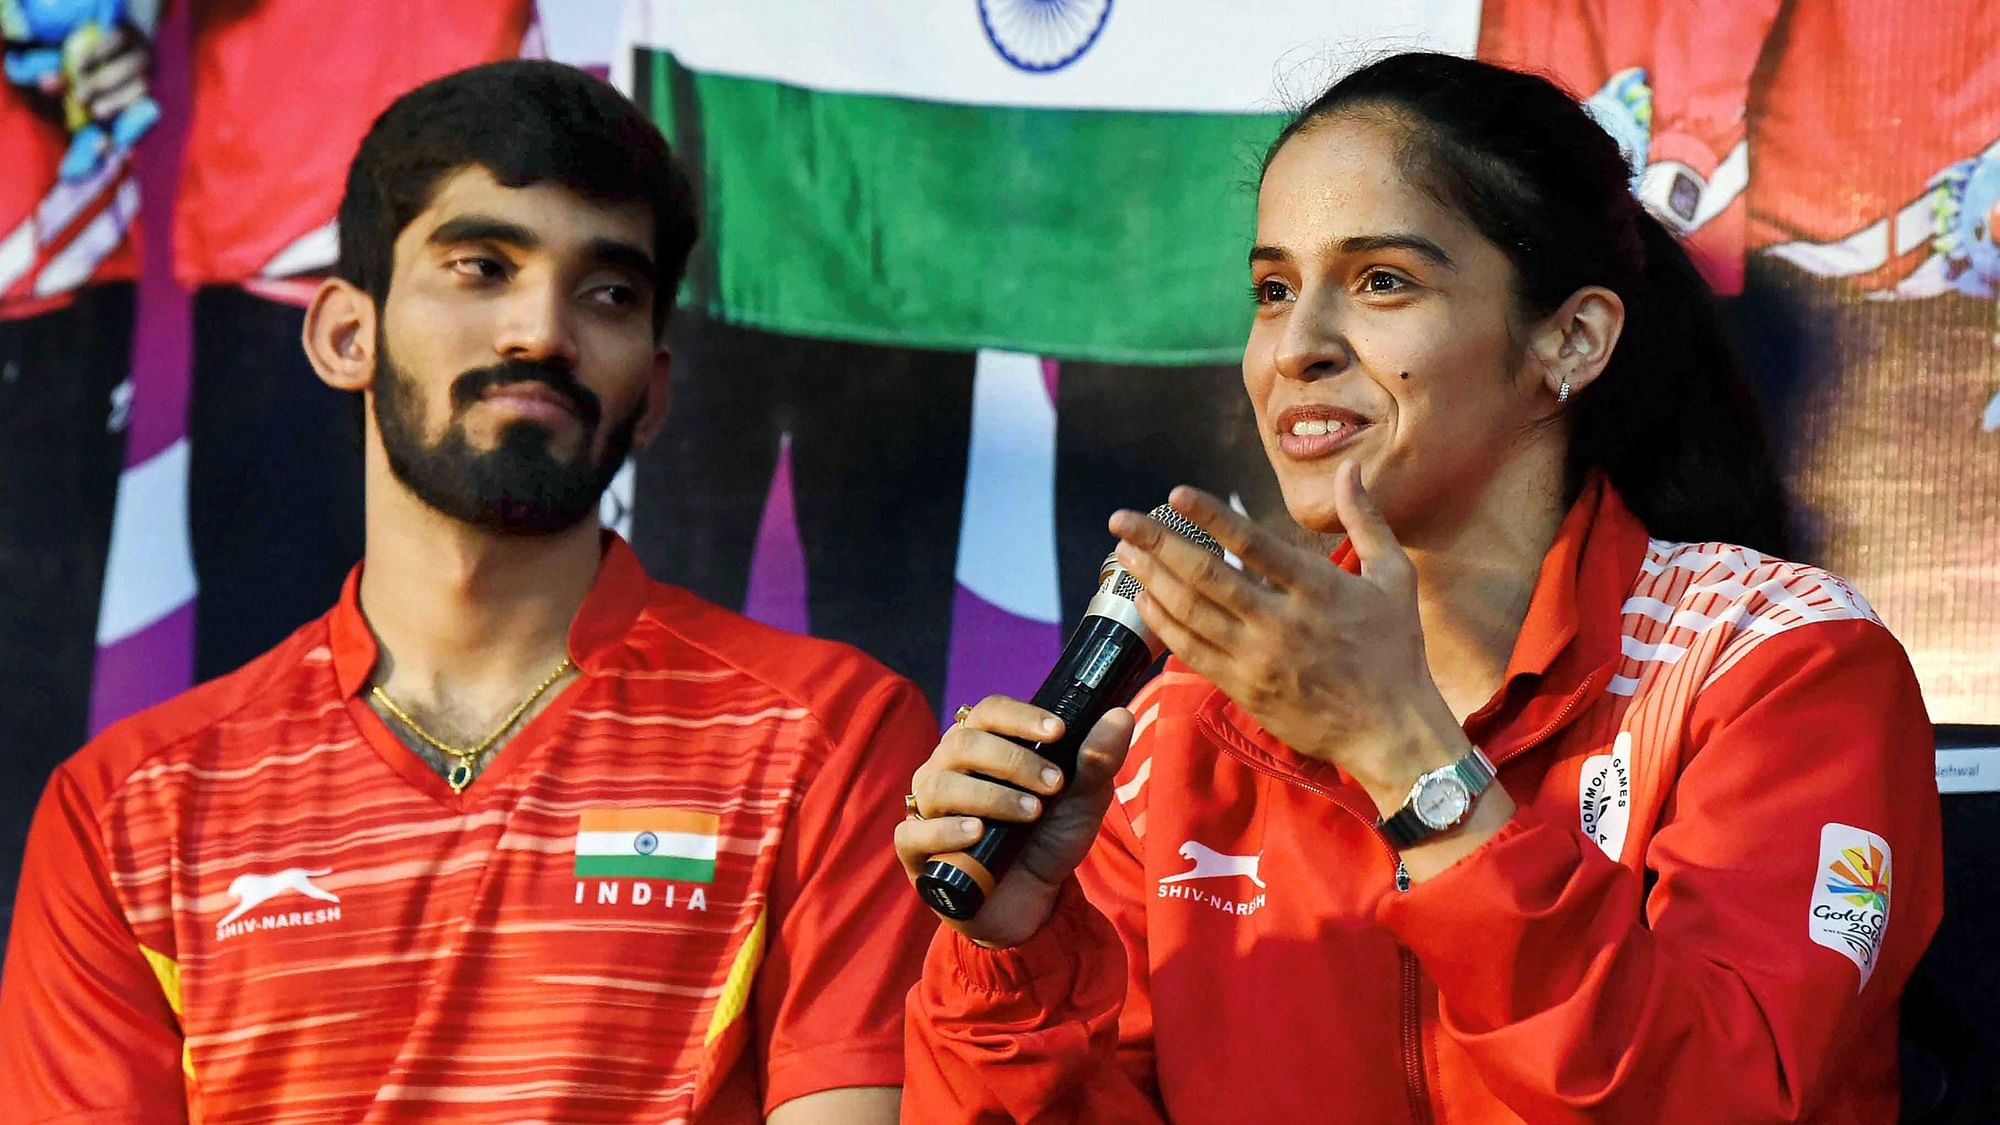 Both Saina and Srikanth took to Twitter to spread the awareness about coronavirus.